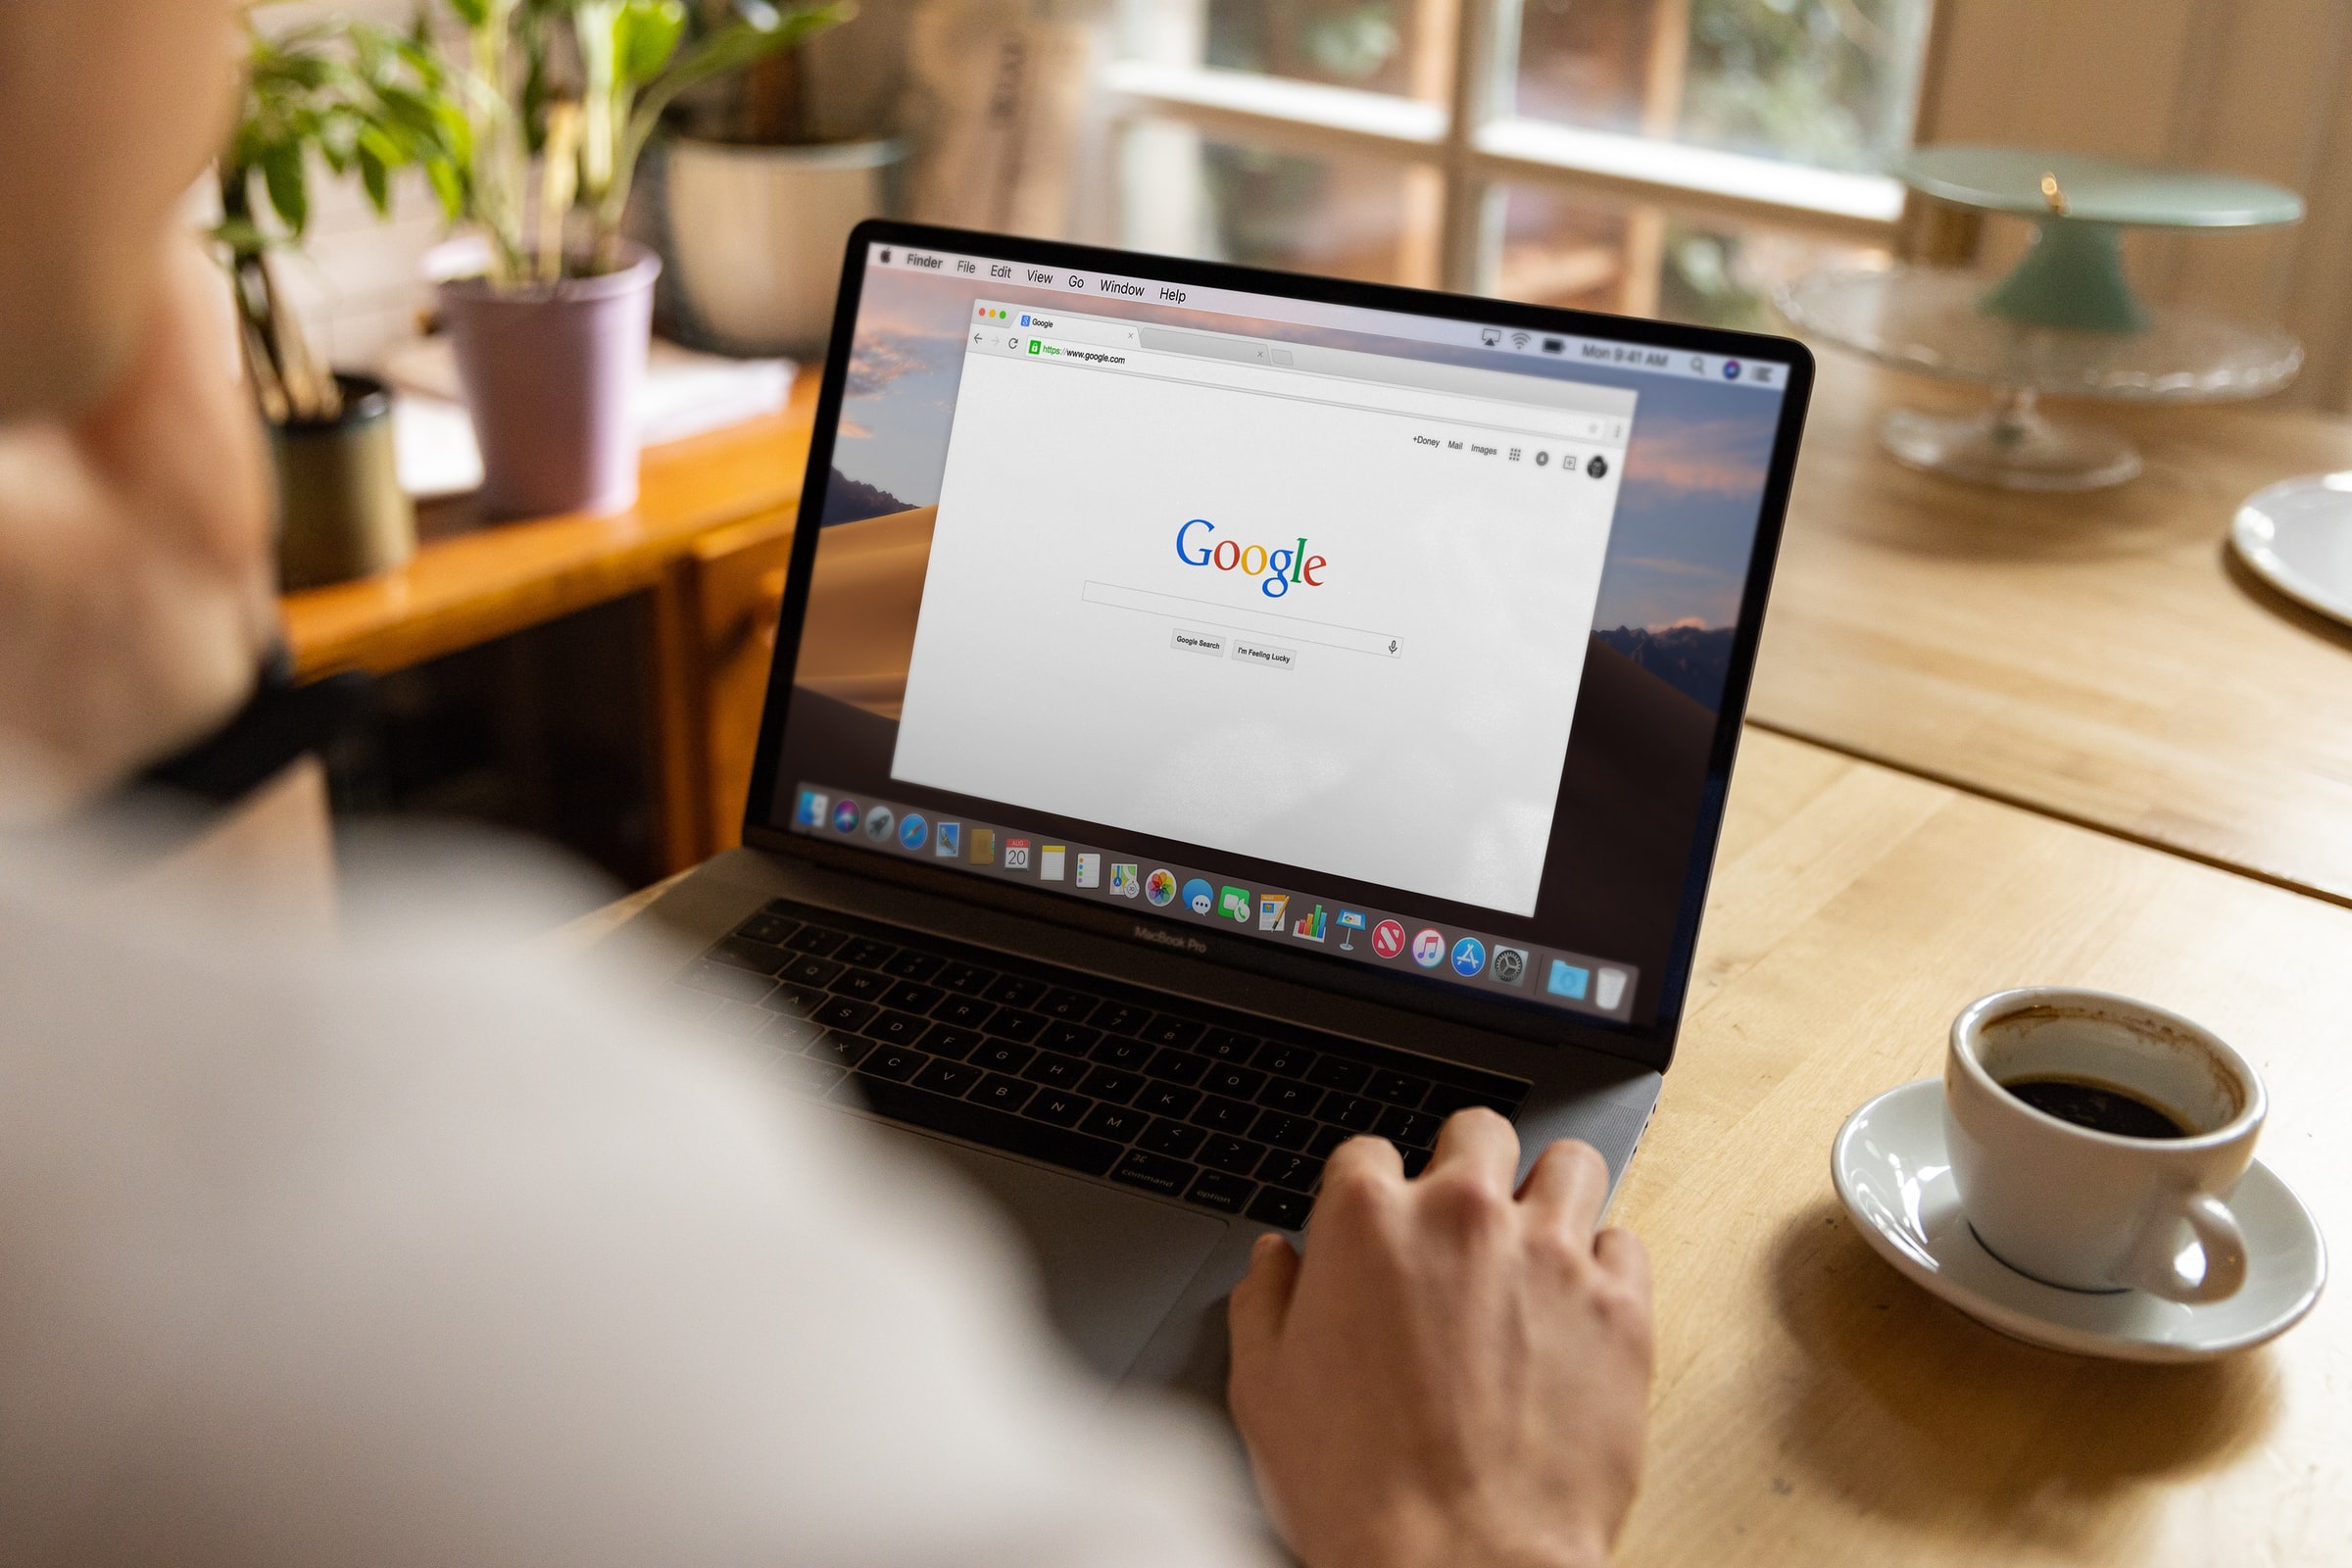 5 Steps to Organically Rank Higher on Google: A Guide for Local Businesses